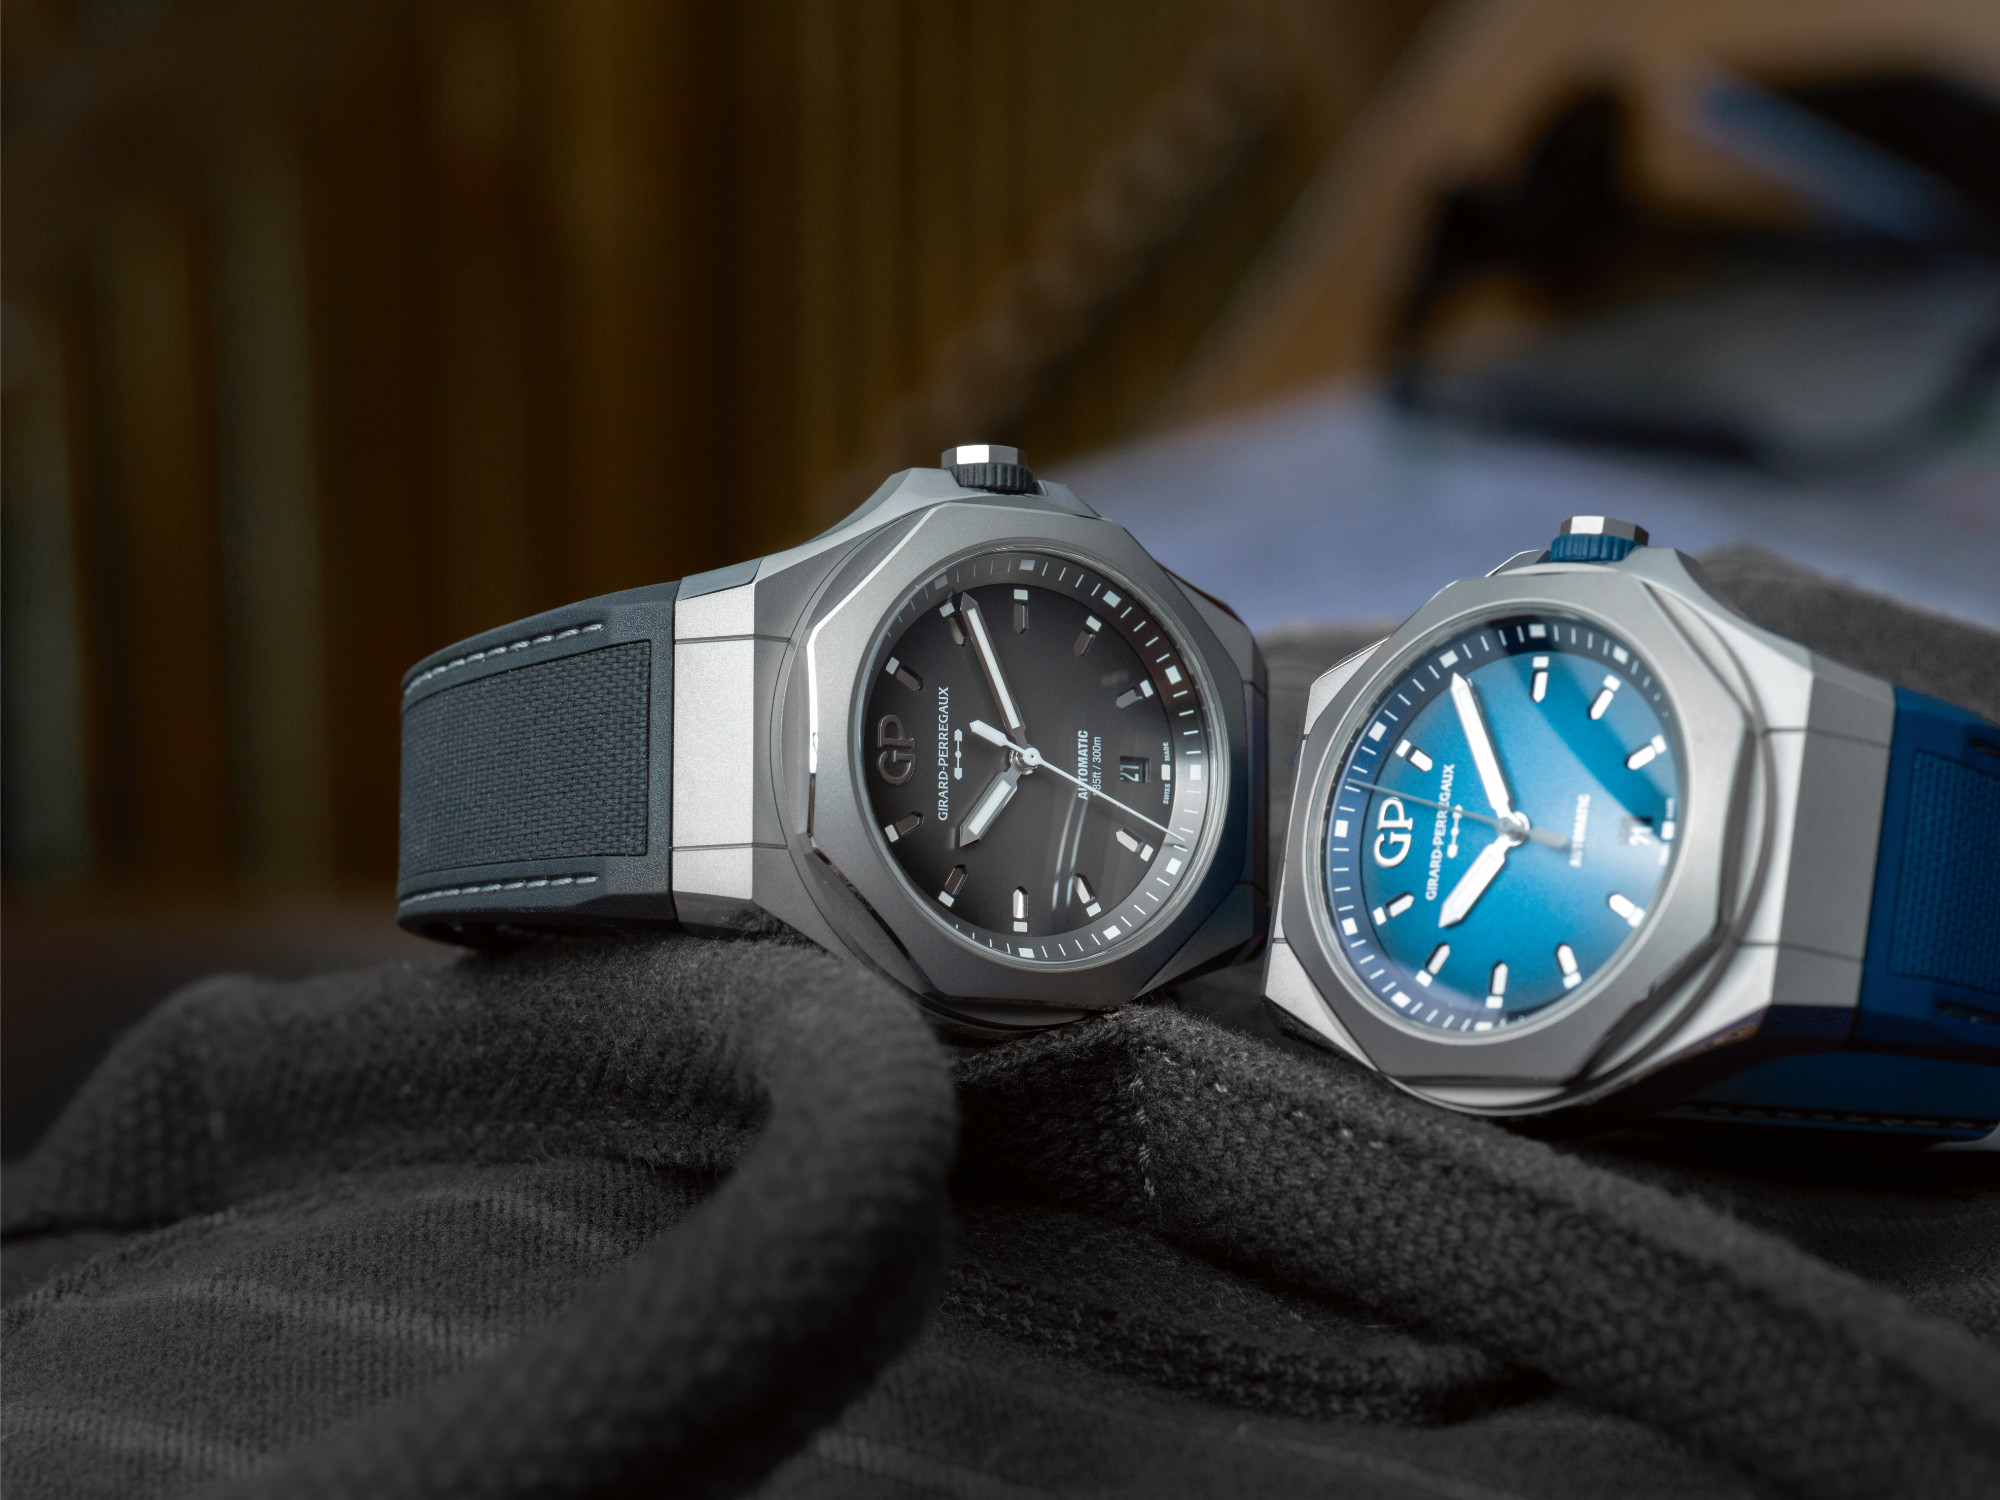 The Laureato Absolute Ti 230, as previously stated, is offered in two variants, blue and grey. Each option is limited to 230 pieces